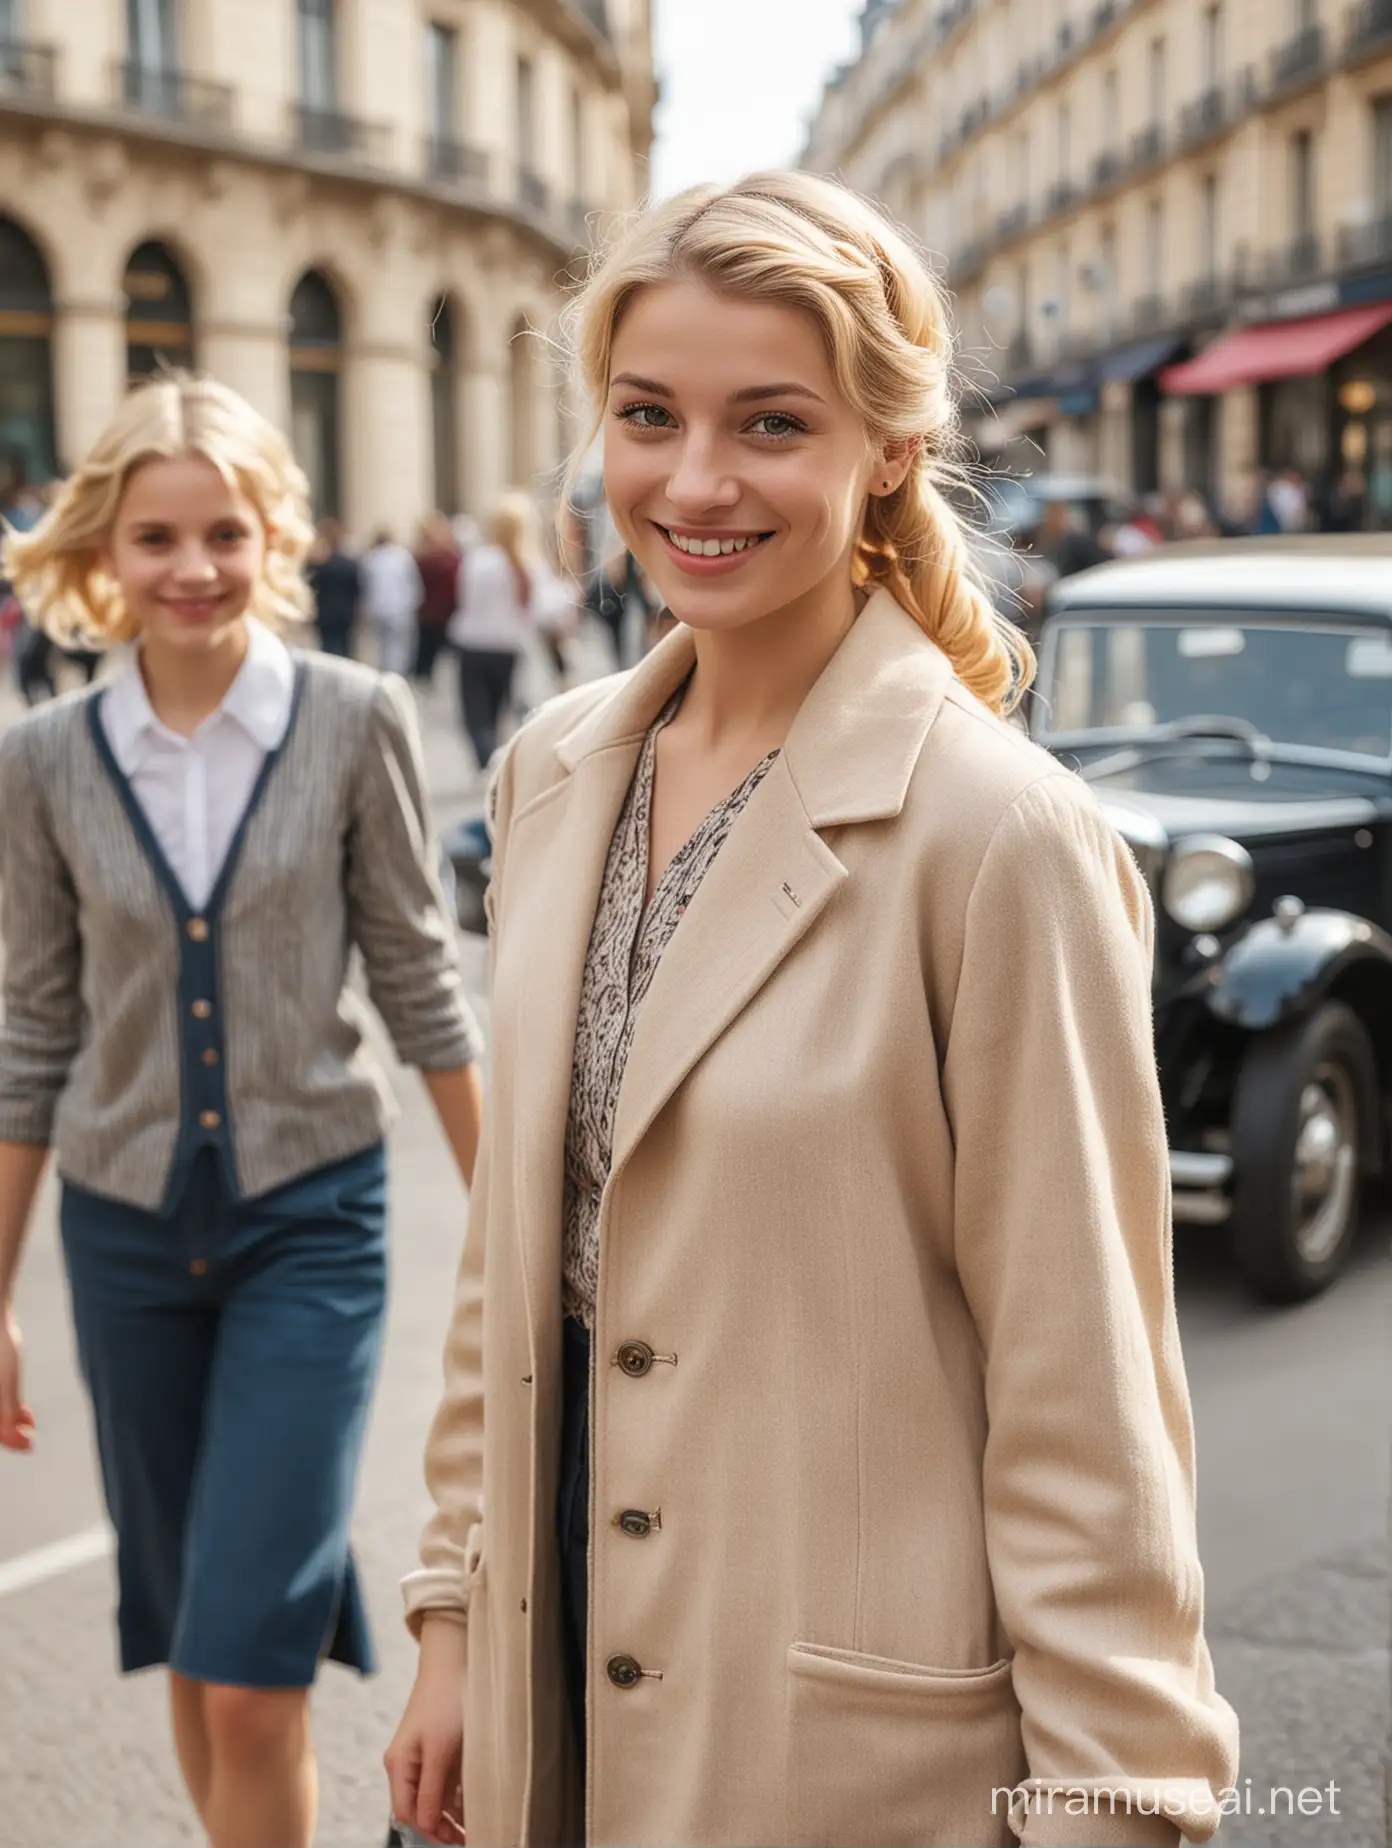 Fashion portrait of a beautiful Parisian woman from the 1920s with blonde hair, twintails, smiling, looking
spectator, wearing fashionable clothes walking down the streets of Paris
During the day, accompanied by two children who are happy full-body shot, a car parked in the middle of the street is blurred, a 50mm f1.4.